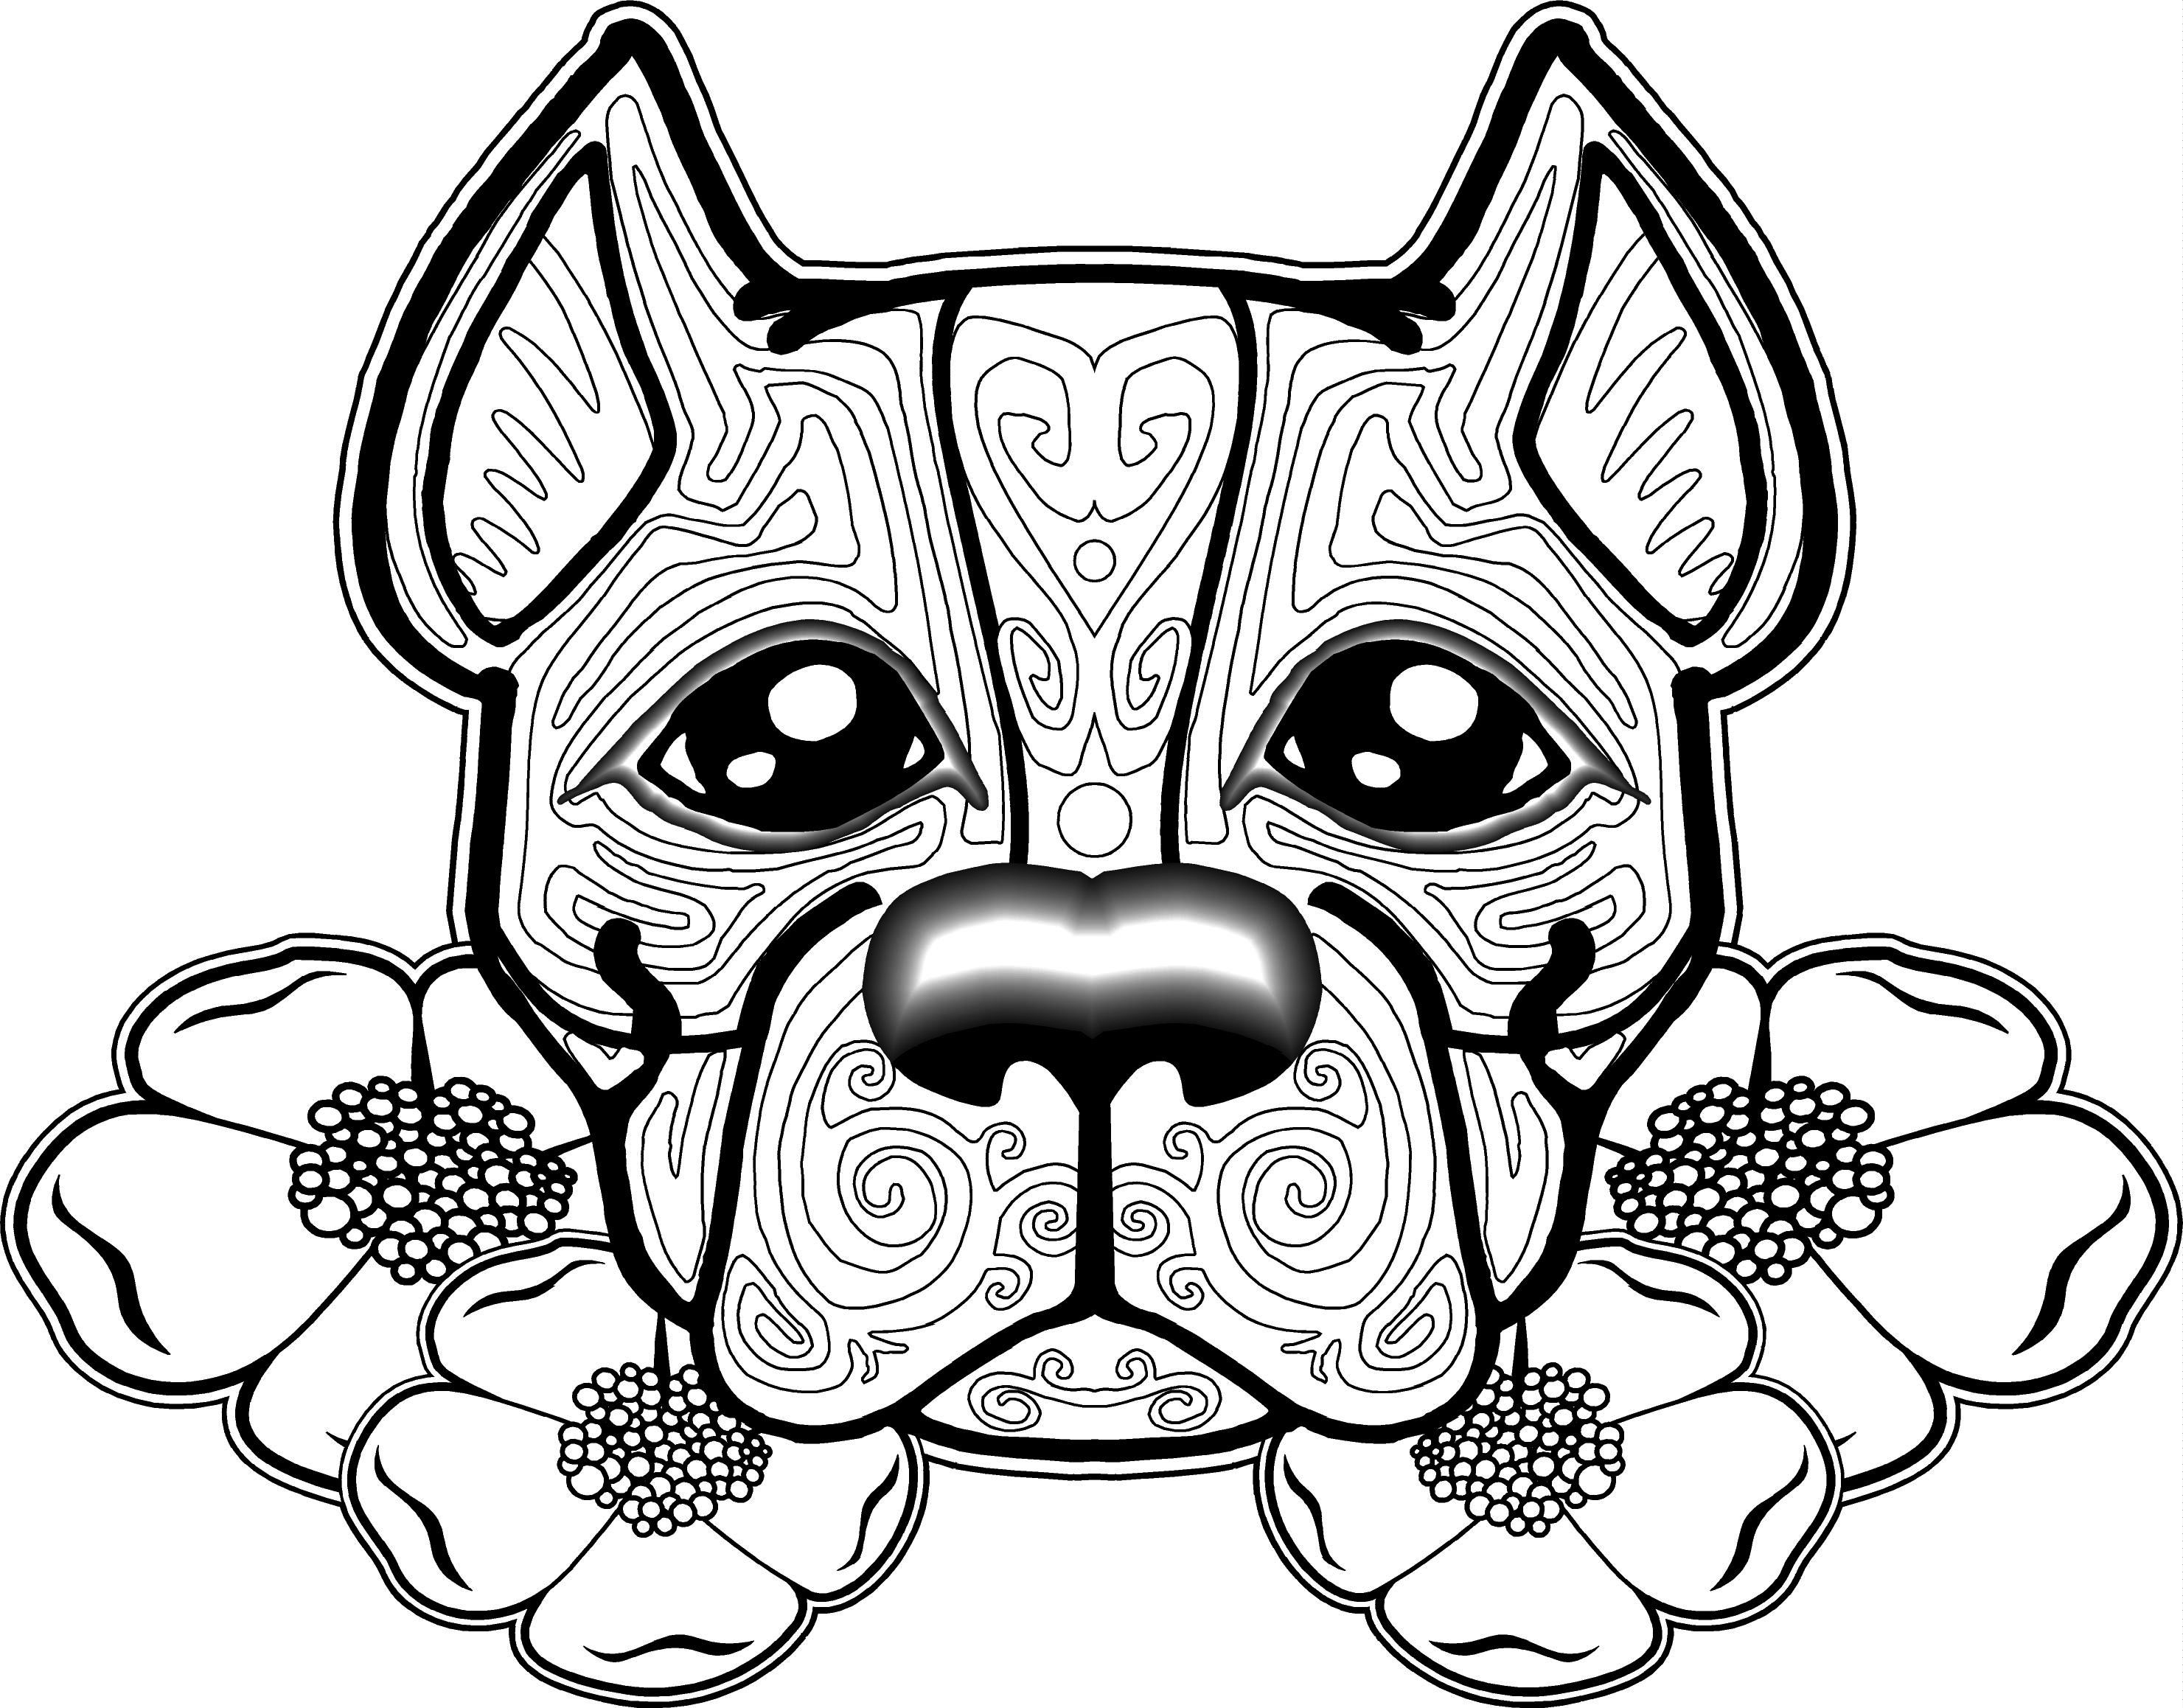 Free Dog Coloring Pages For Adults | Free Printable Coloring Pages - Free Printable Dog Coloring Pages